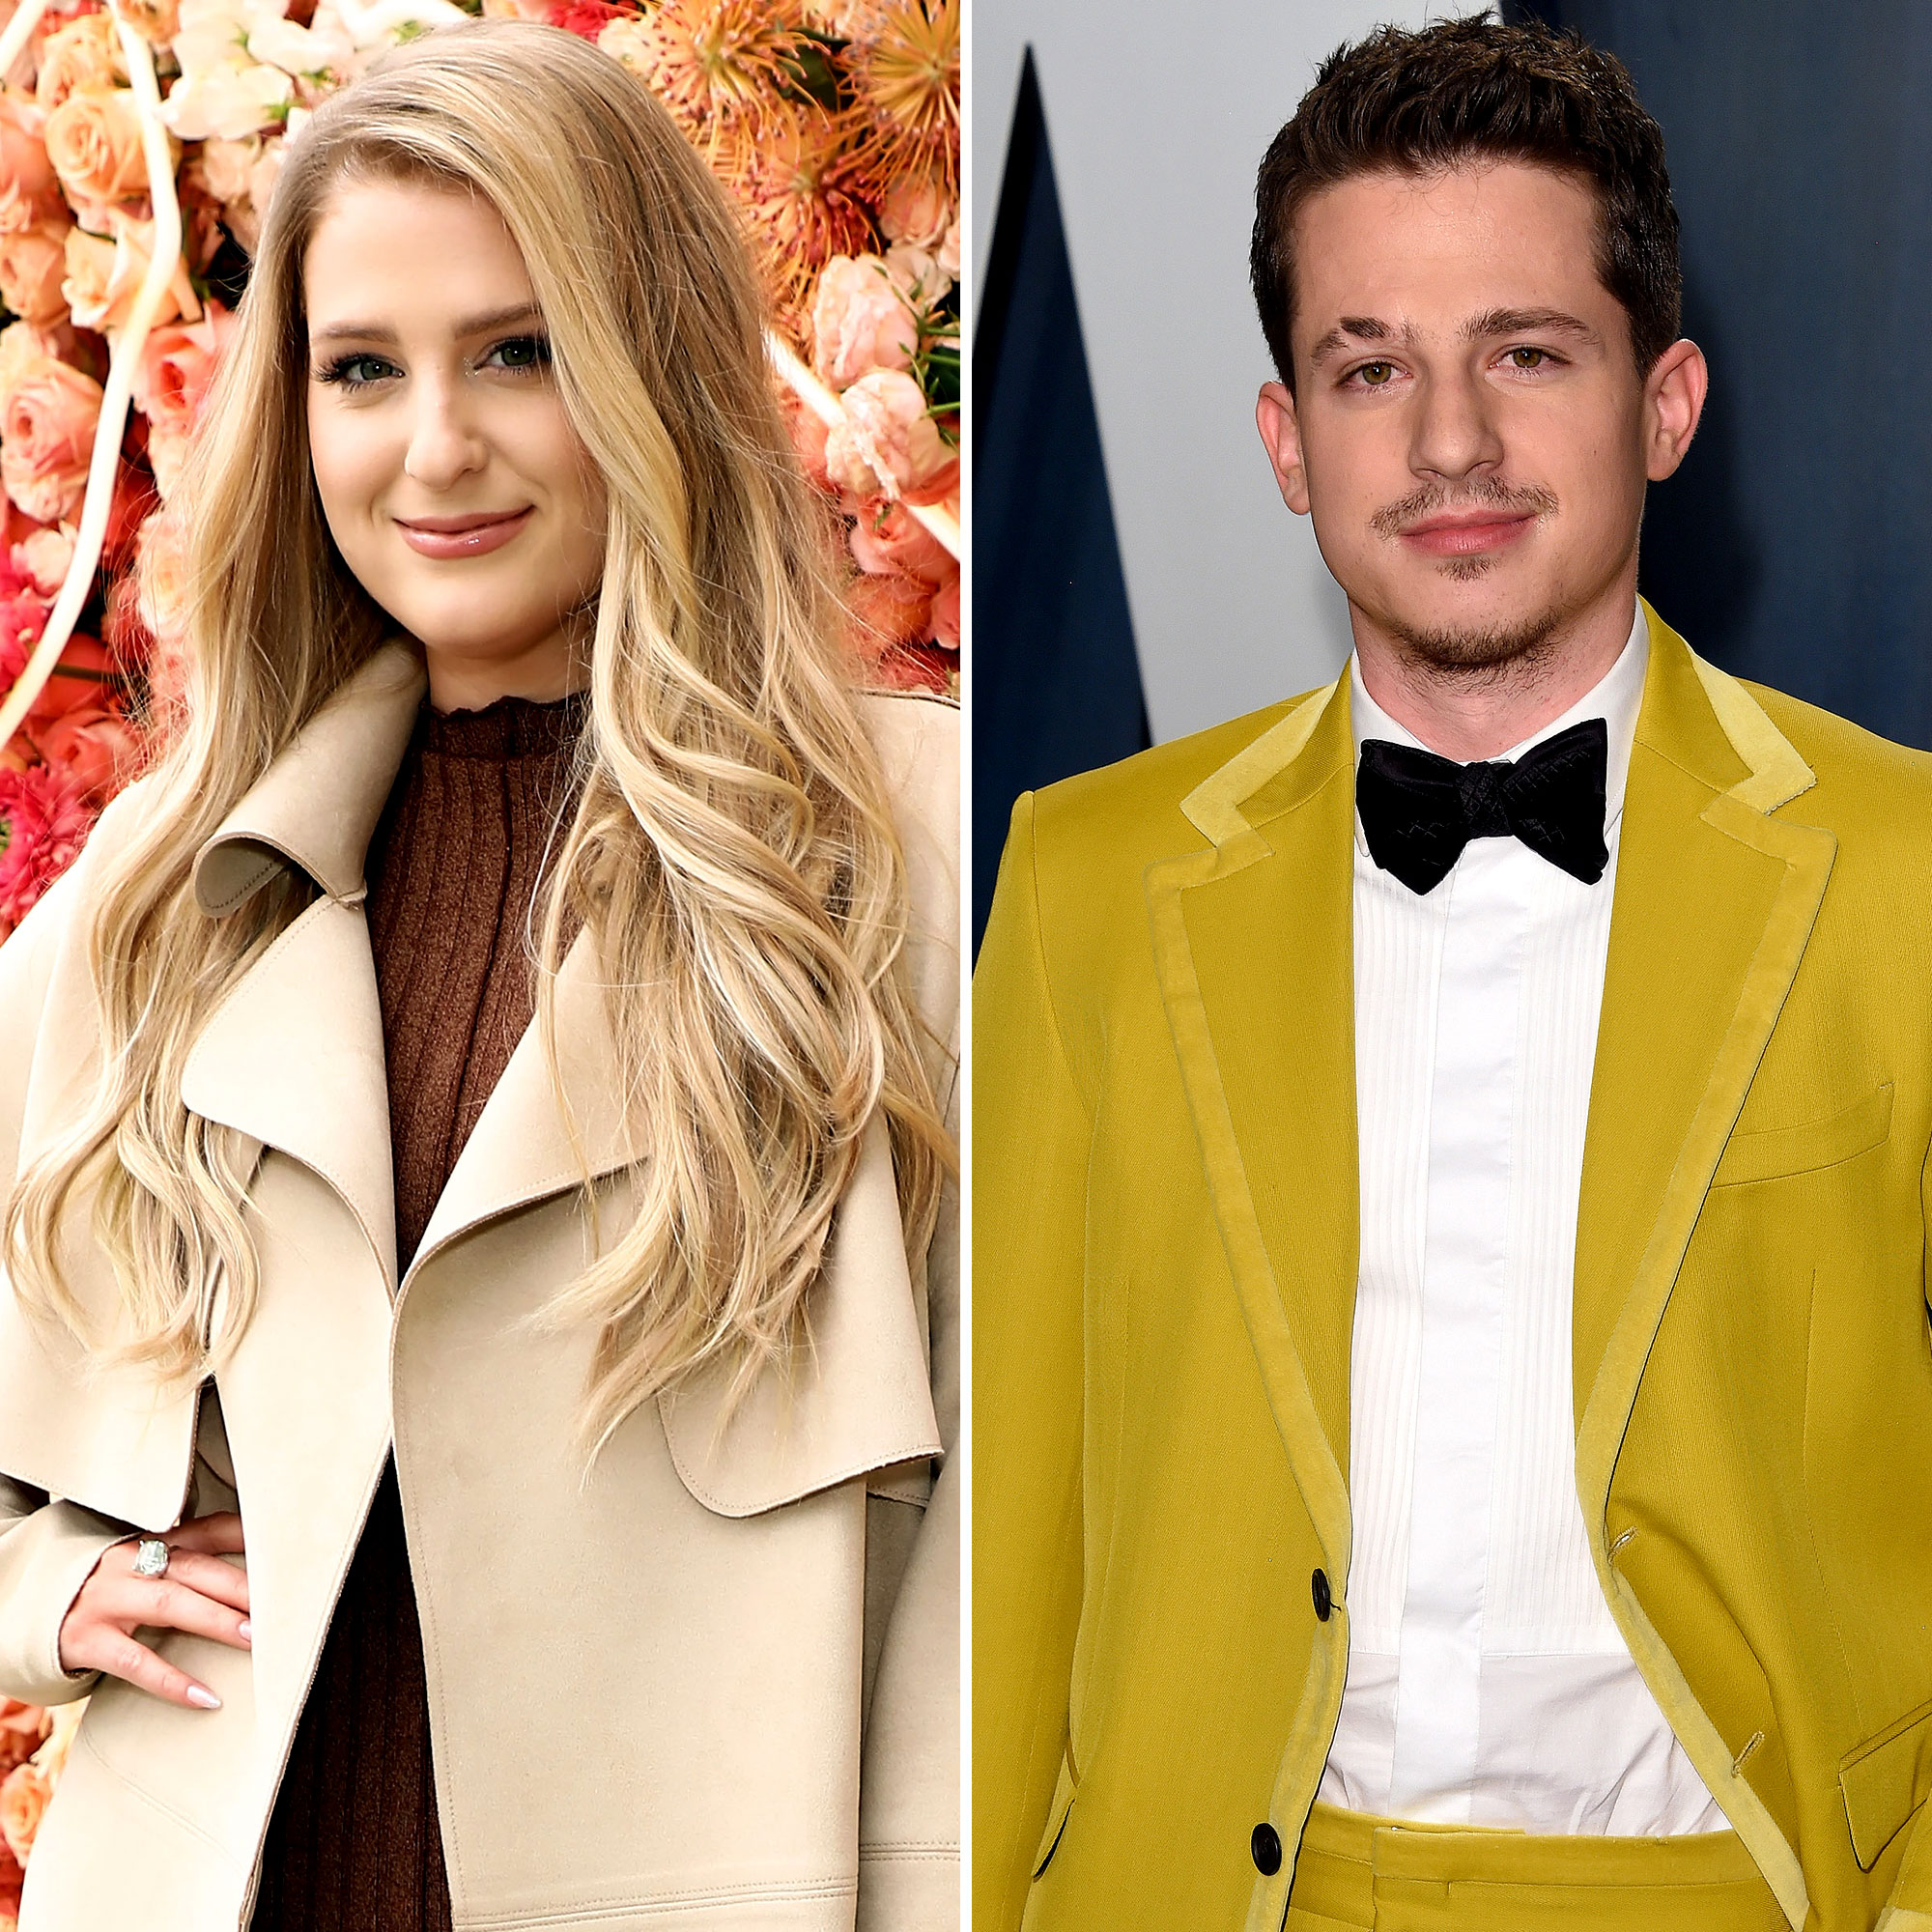 Meghan Trainor Jokes About 'Wild' Charlie Puth Kiss at 2015 AMAs